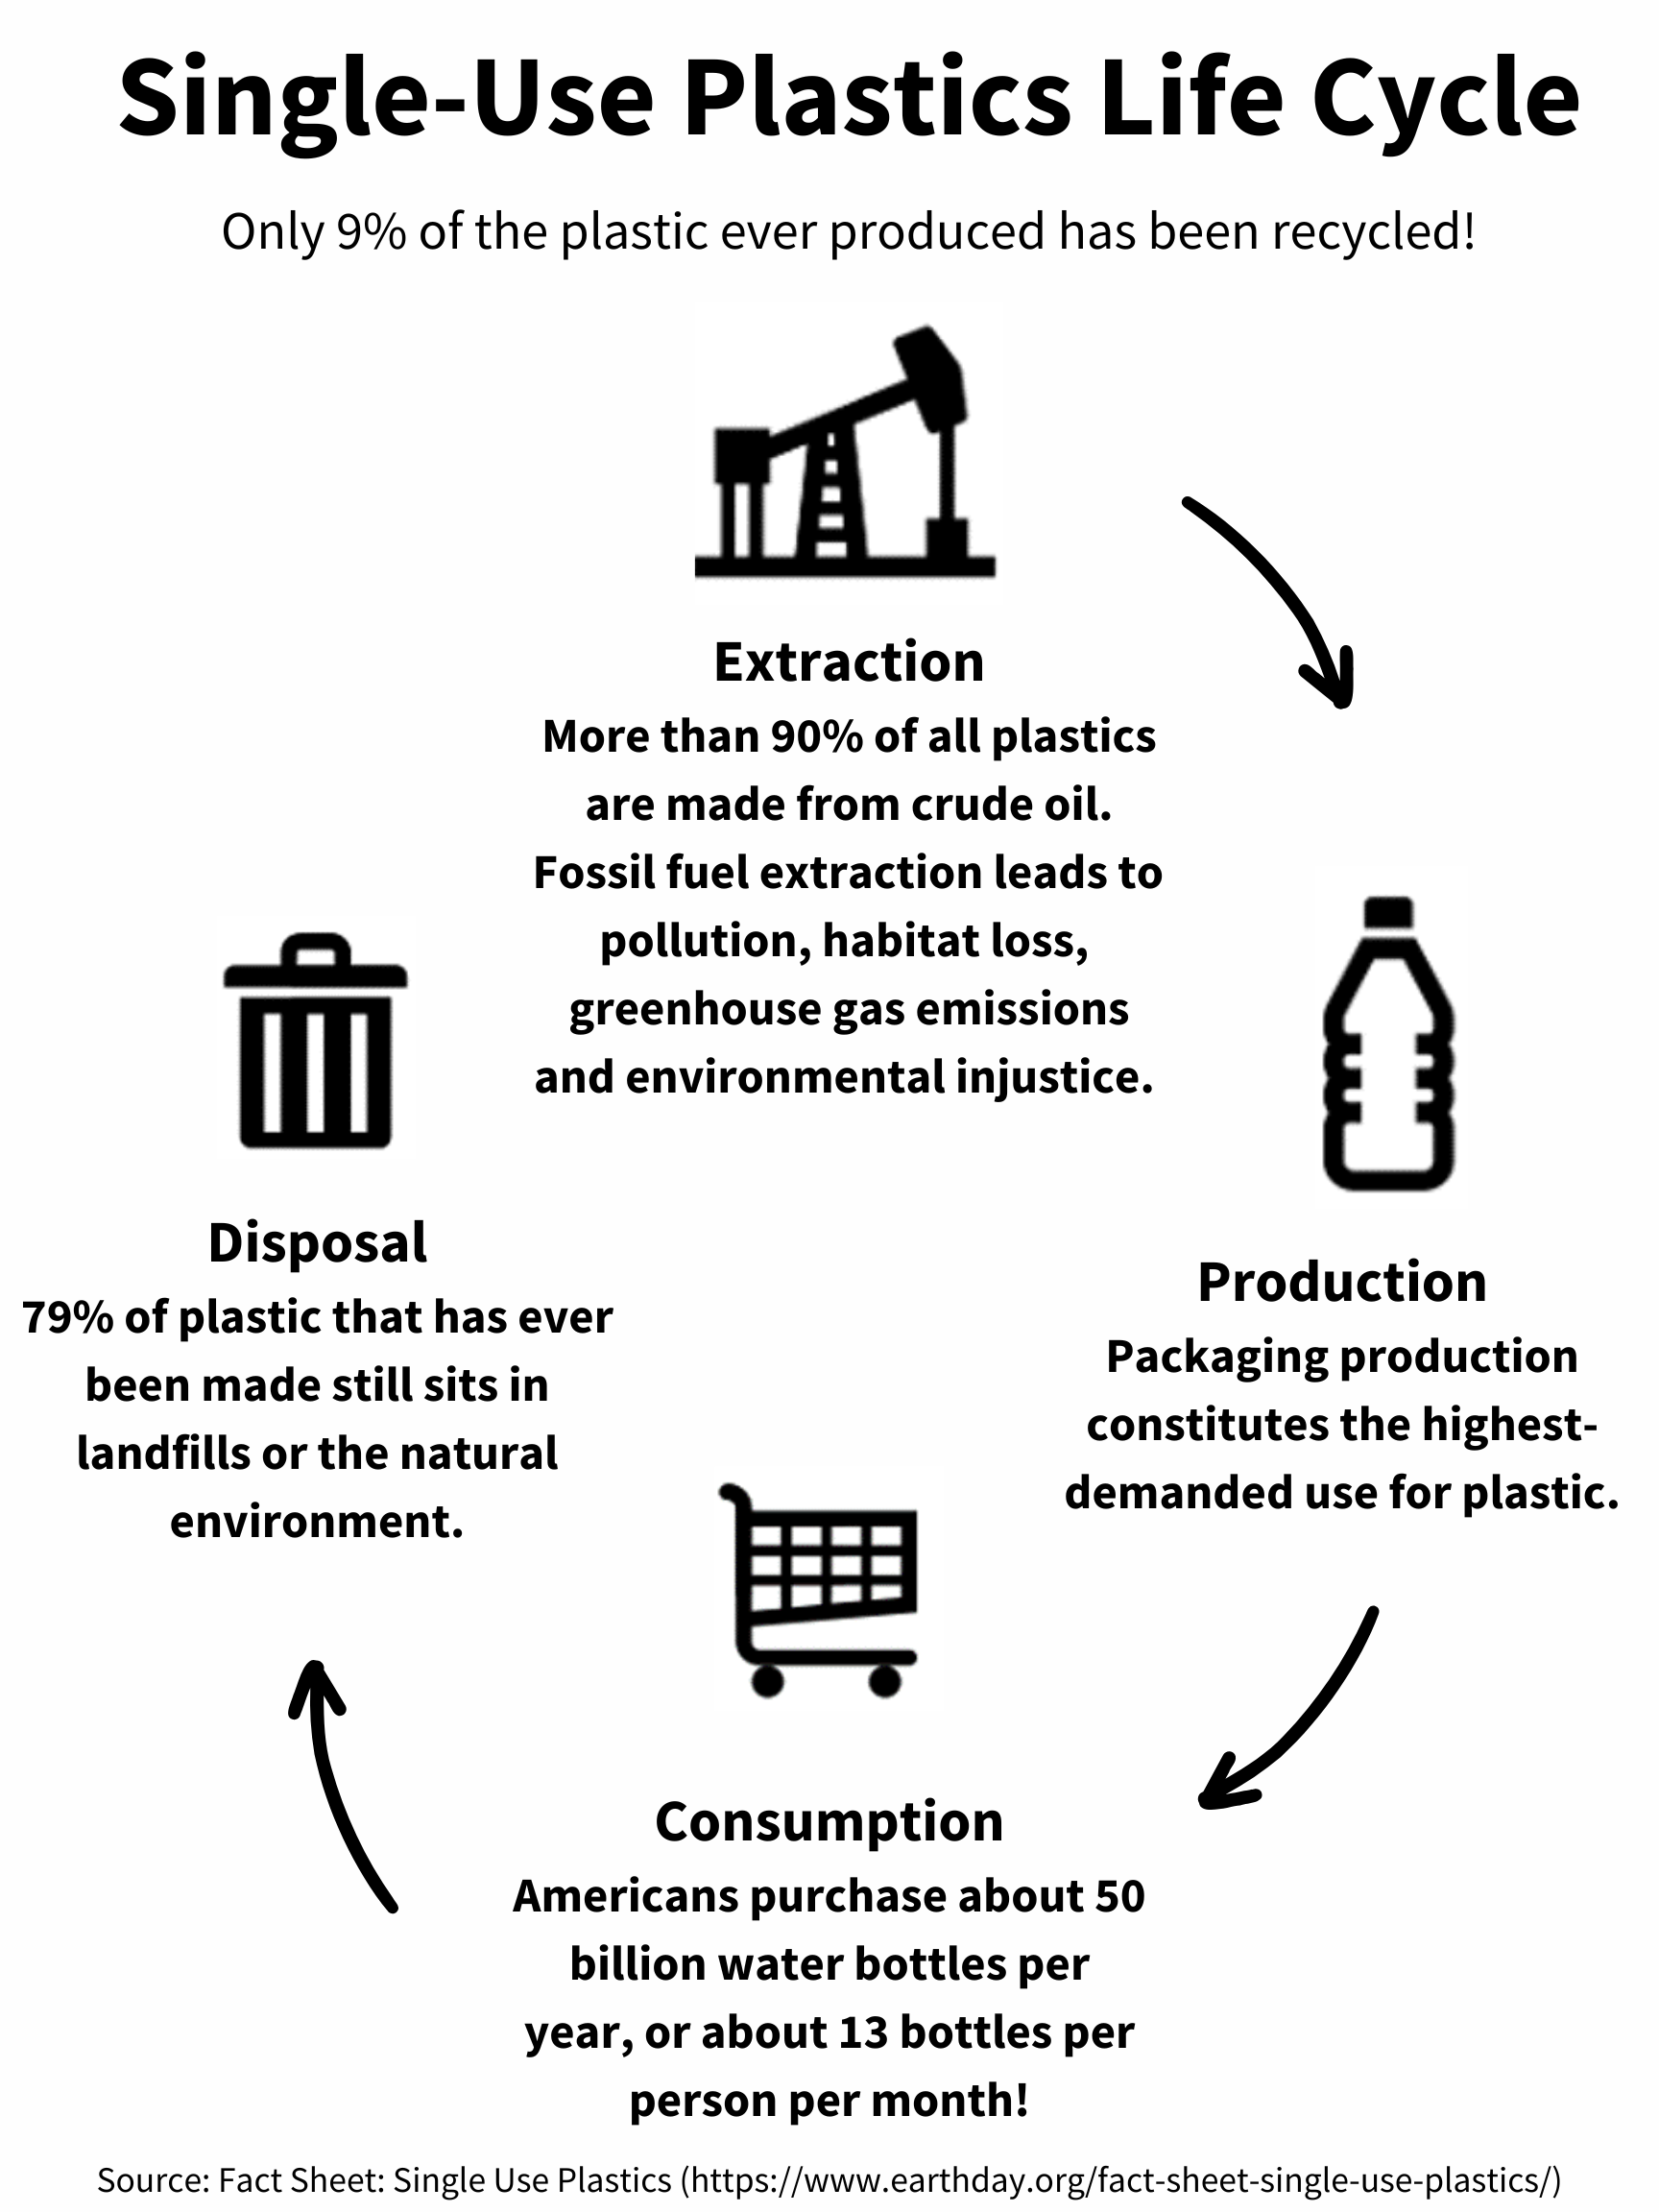 Graphic illustrating the life cycle of plastic, from extraction of fossil fuels, to production, to consumption, to disposal